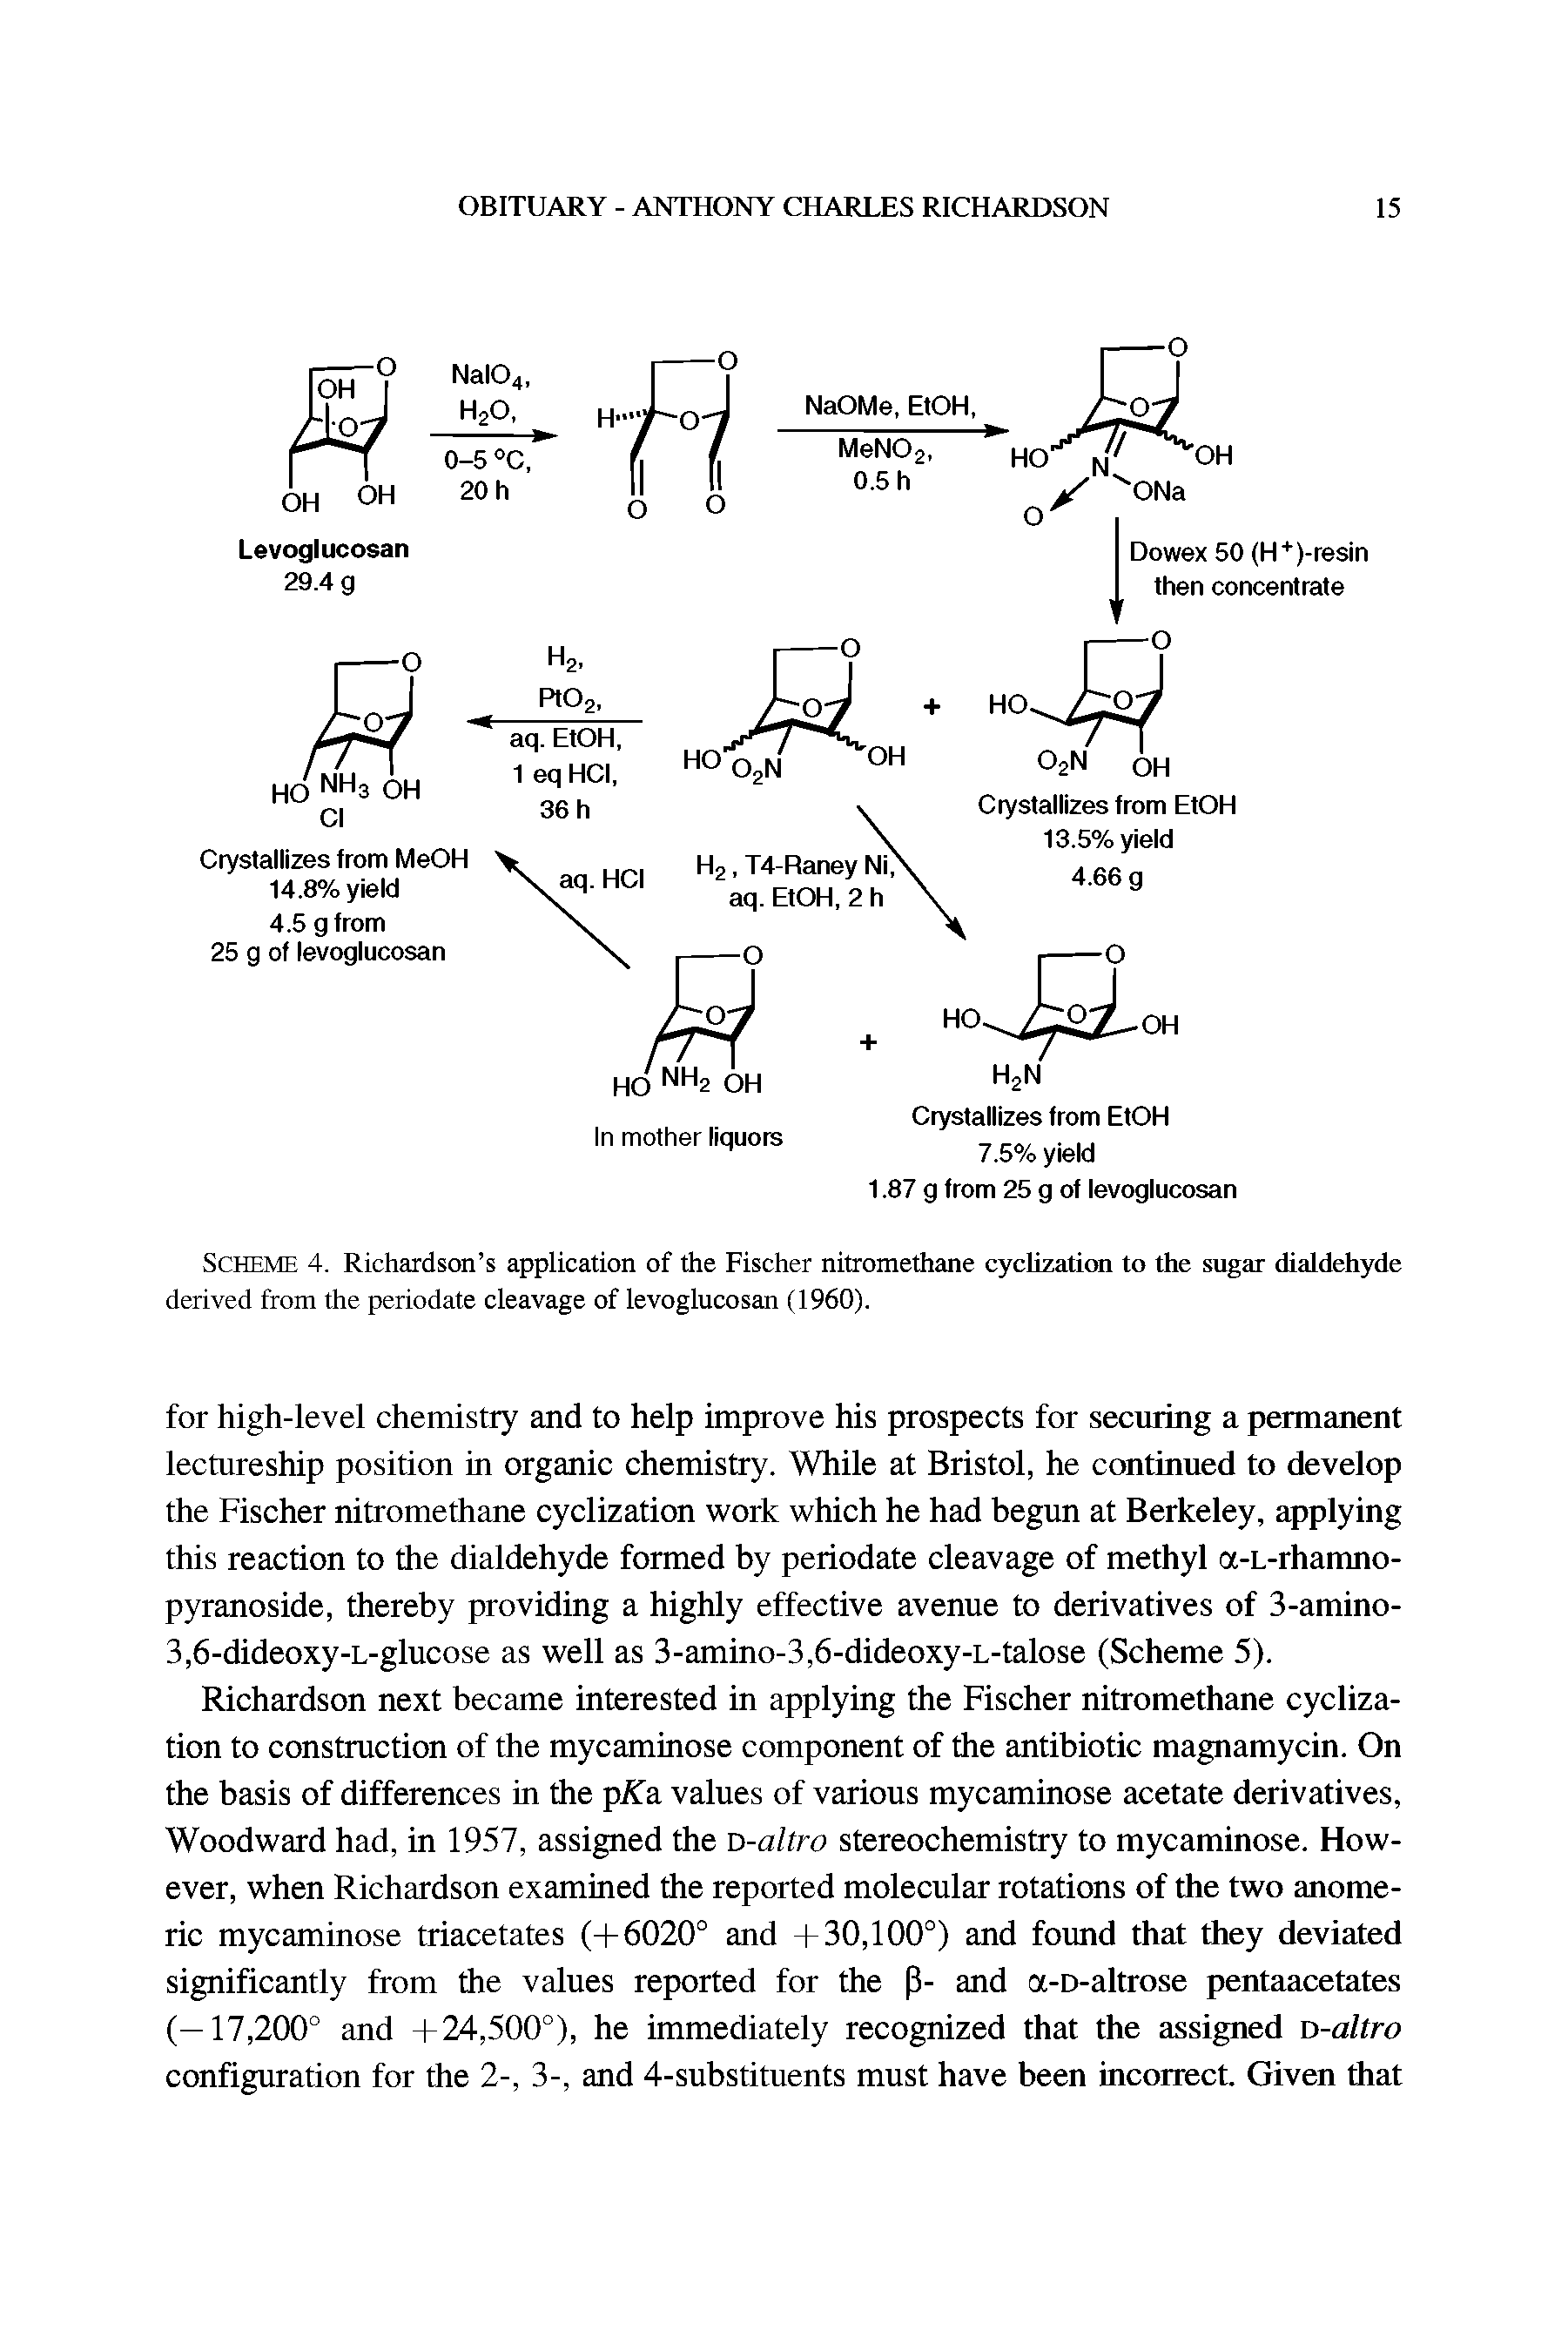 Scheme 4. Richardson s application of the Fischer nitromethane cyclization to the sugar dialdehyde derived from the periodate cleavage of levoglucosan (1960).